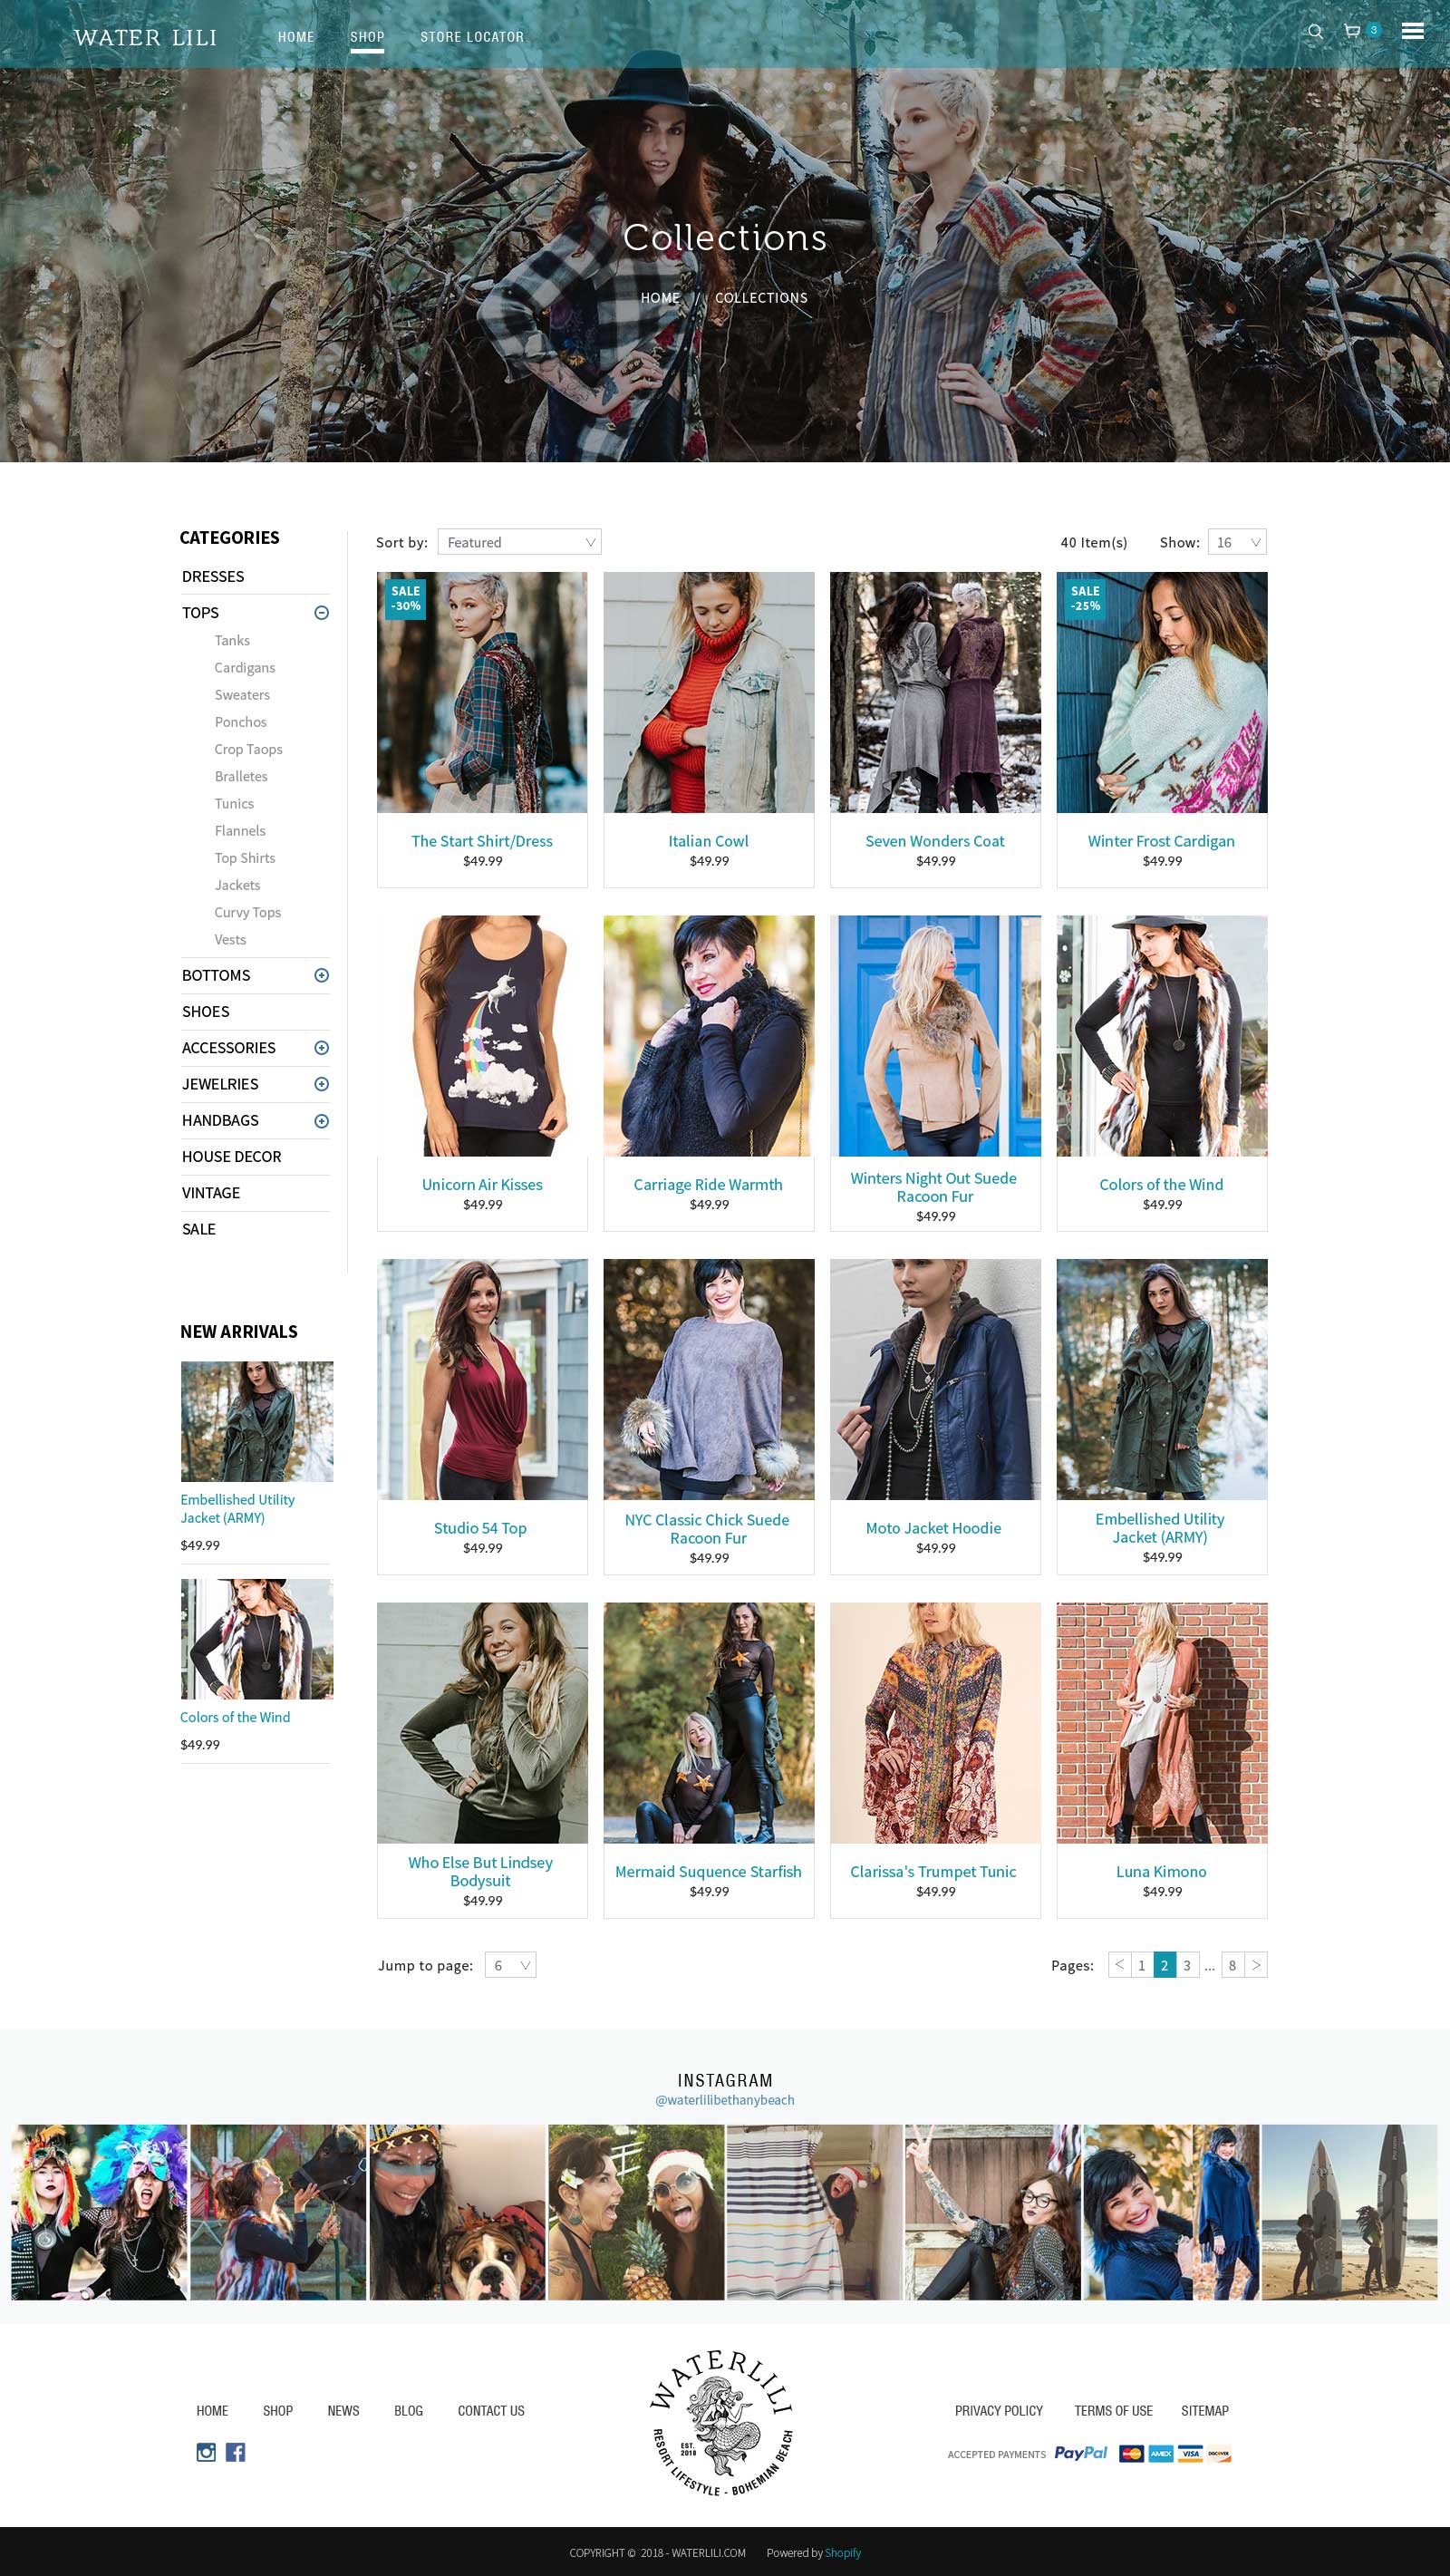 waterlili collections page with sidebar filter